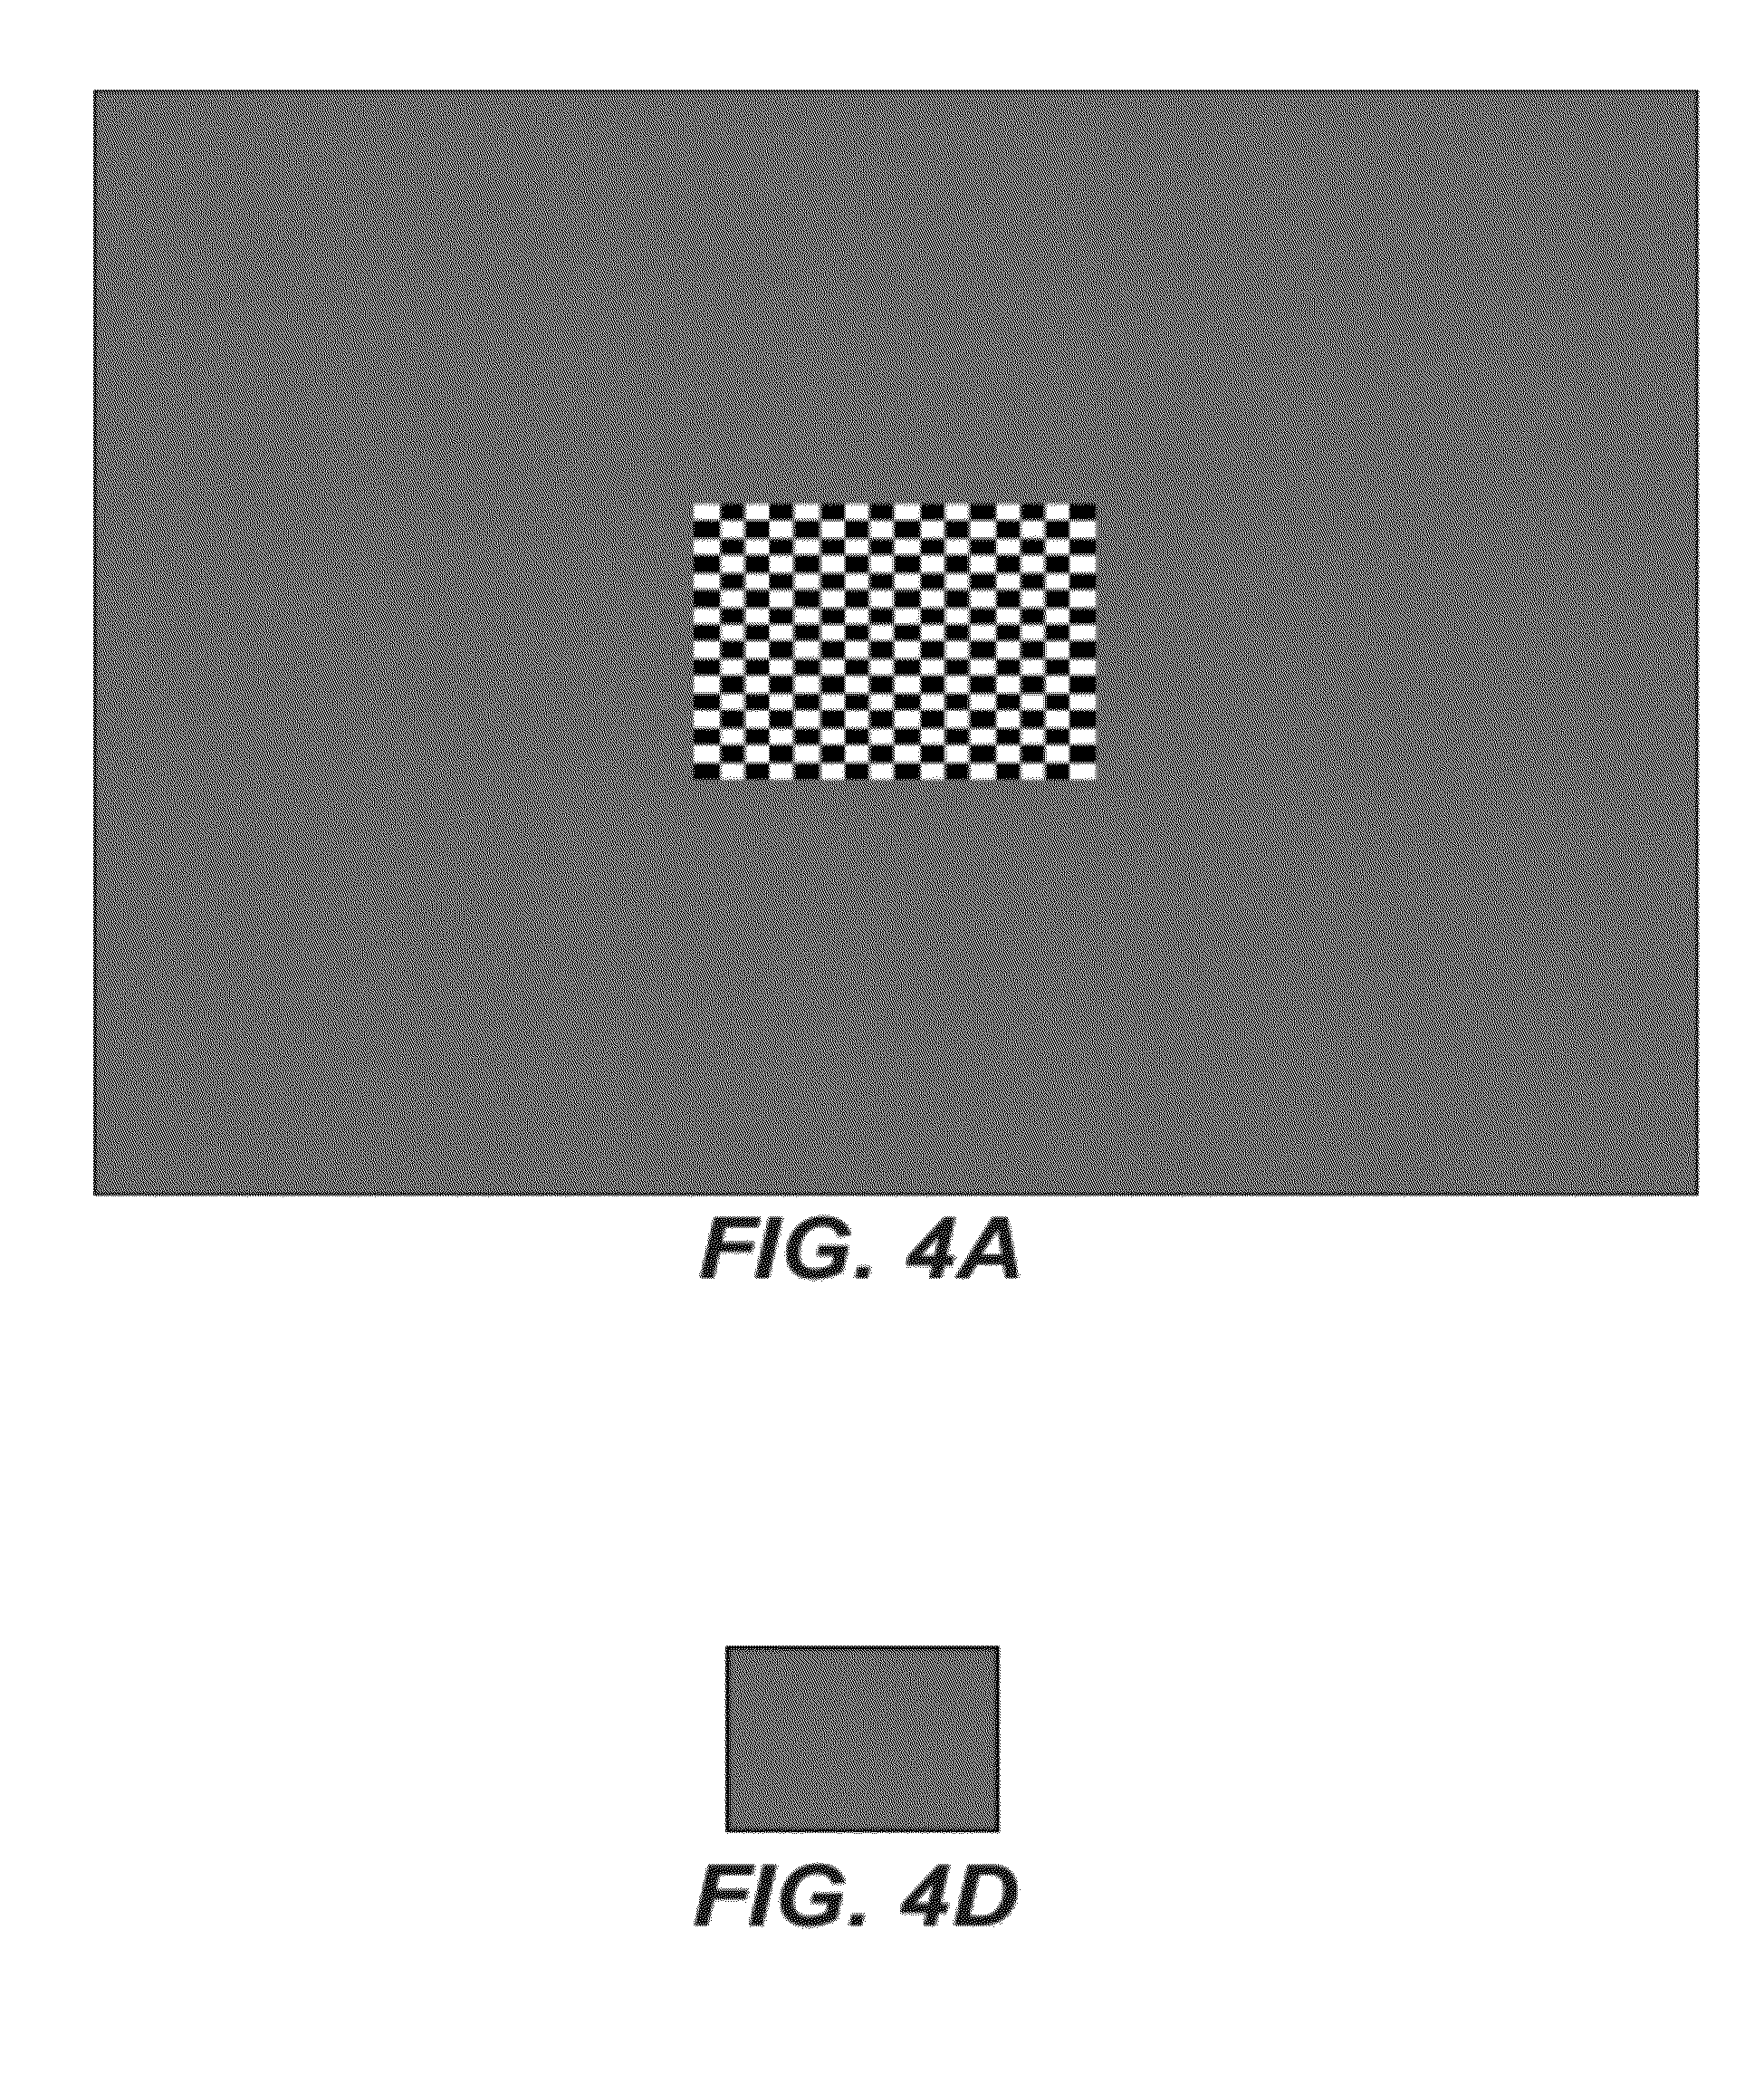 Method and System for Display Characterization or Calibration Using A Camera Device